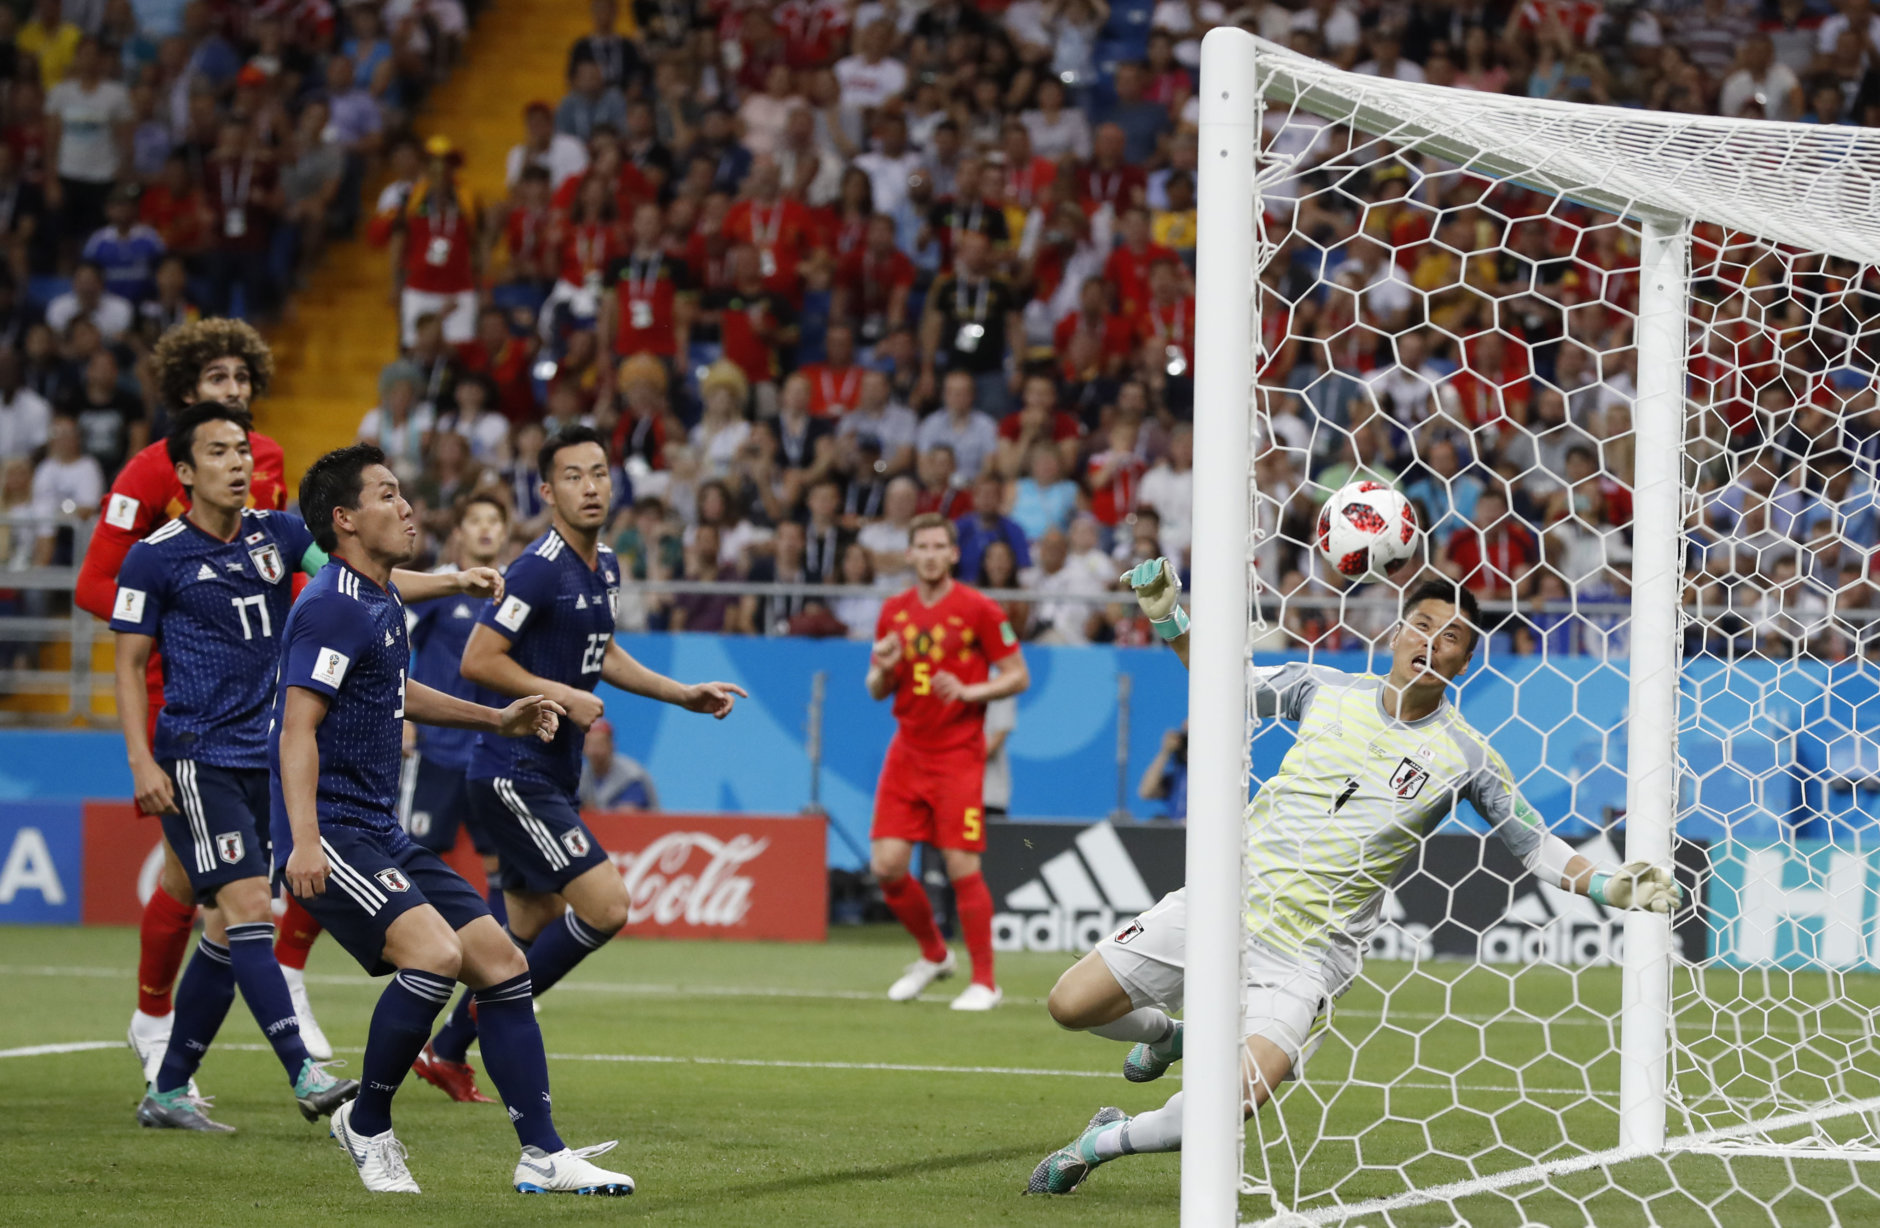 Japan goalkeeper Eiji Kawashima, right, fails to save a ball as Belgium's Jan Vertonghen, center, scores his first side's goal during the round of 16 match between Belgium and Japan at the 2018 soccer World Cup in the Rostov Arena, in Rostov-on-Don, Russia, Monday, July 2, 2018. (AP Photo/Rebecca Blackwell)